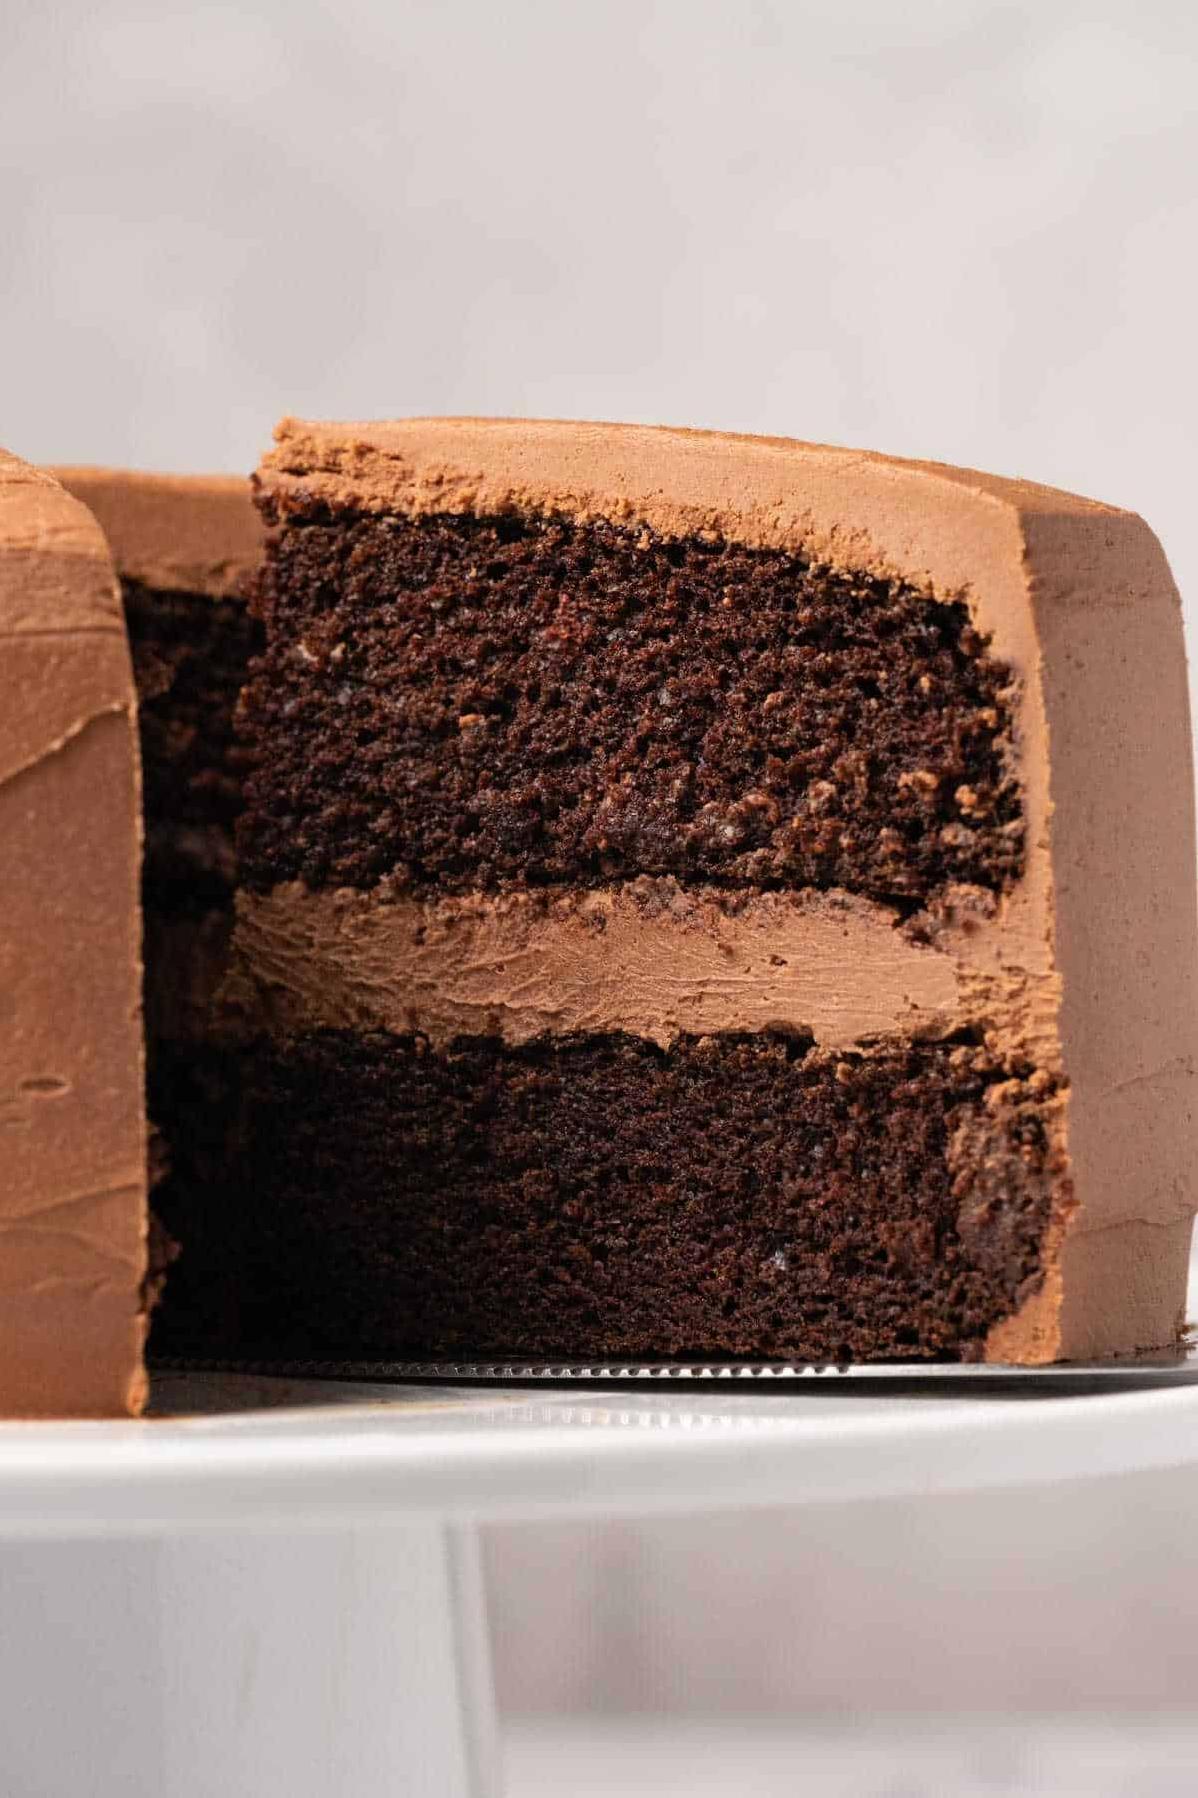  A chocolate cake that's good for your body and soul.